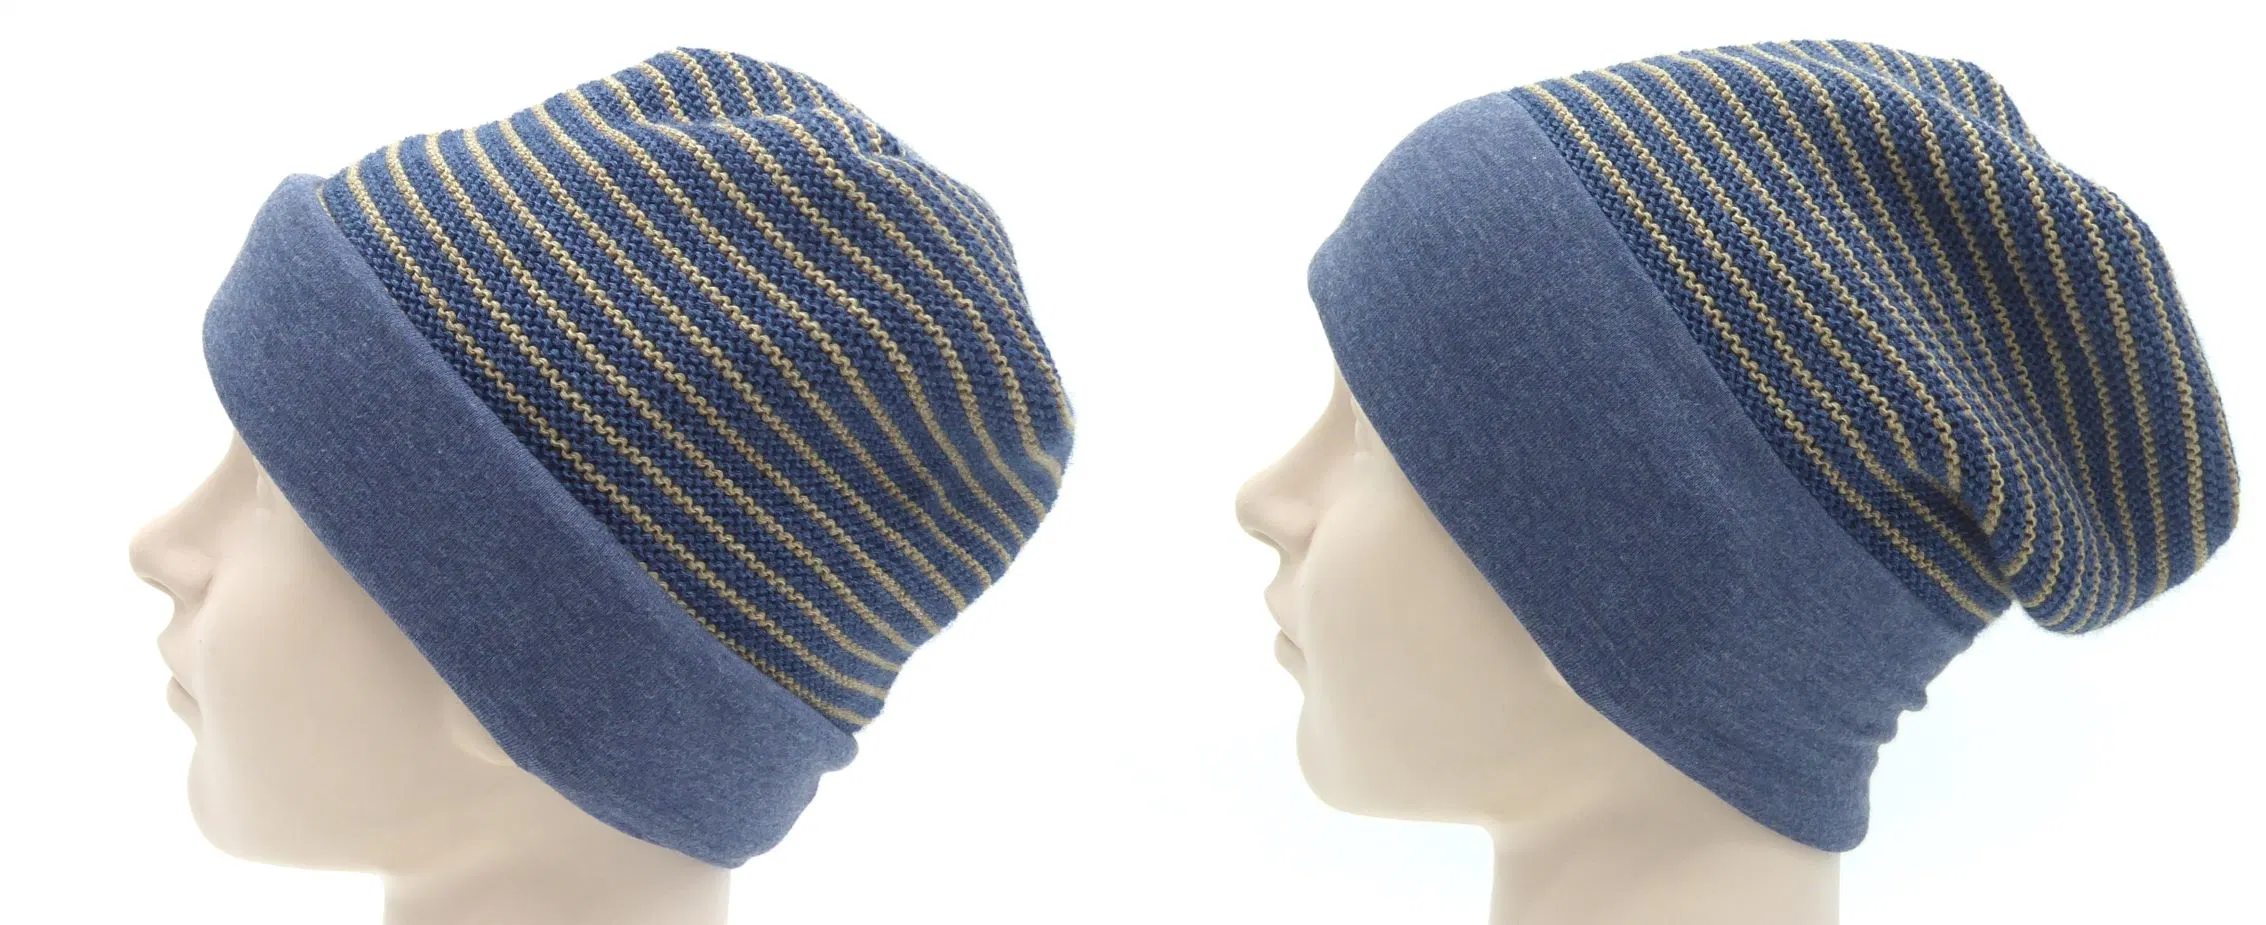 Cotton Yarn Knitted Hat & Scarf with Cotton Jersey Lining and Cuff